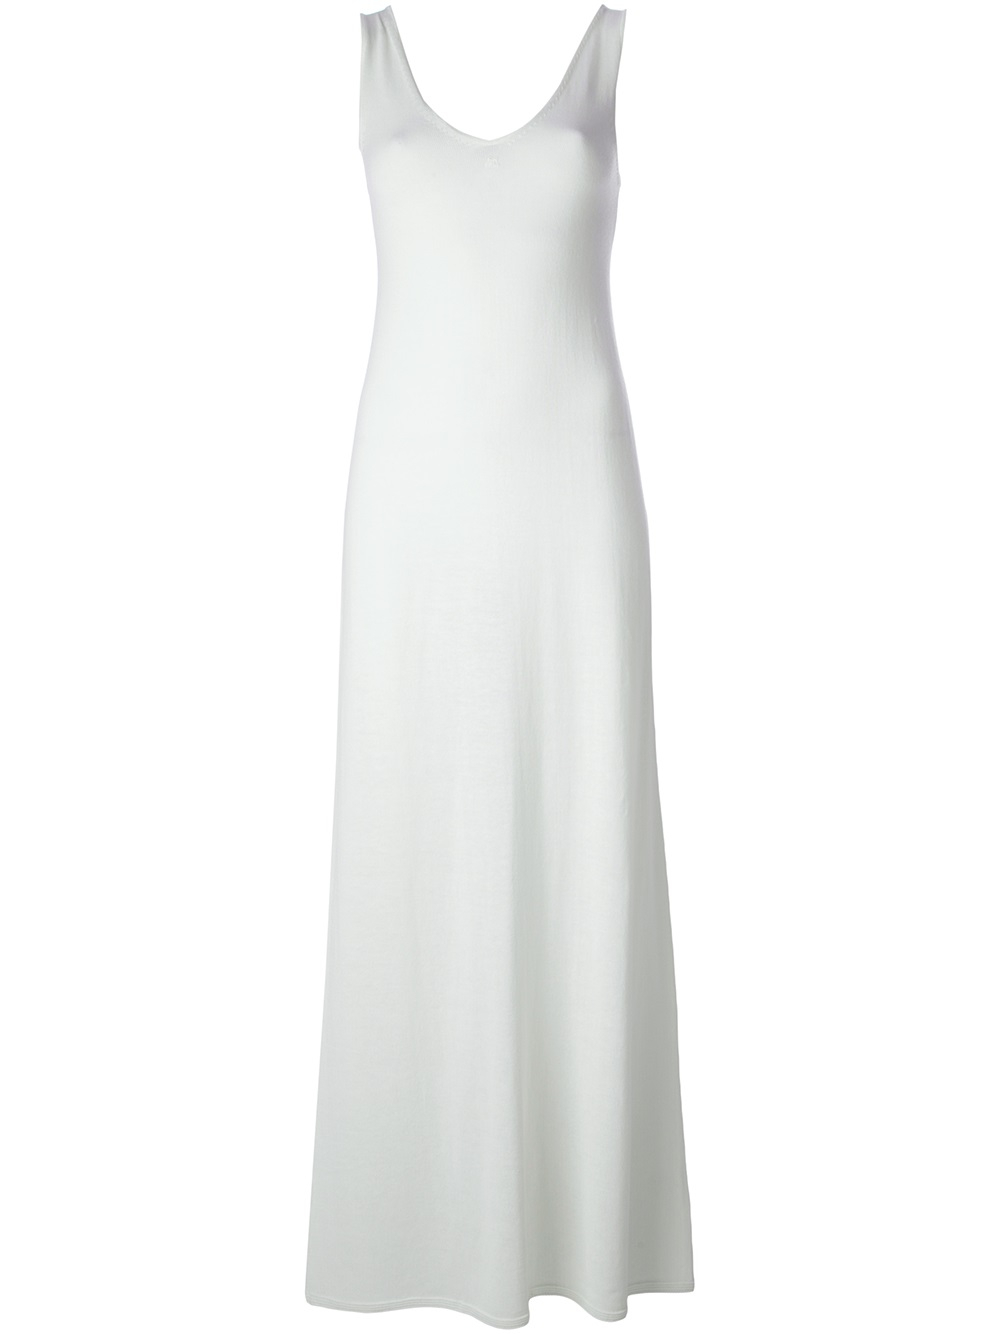 Courreges Long Sleeveless Sweater Dress in White | Lyst